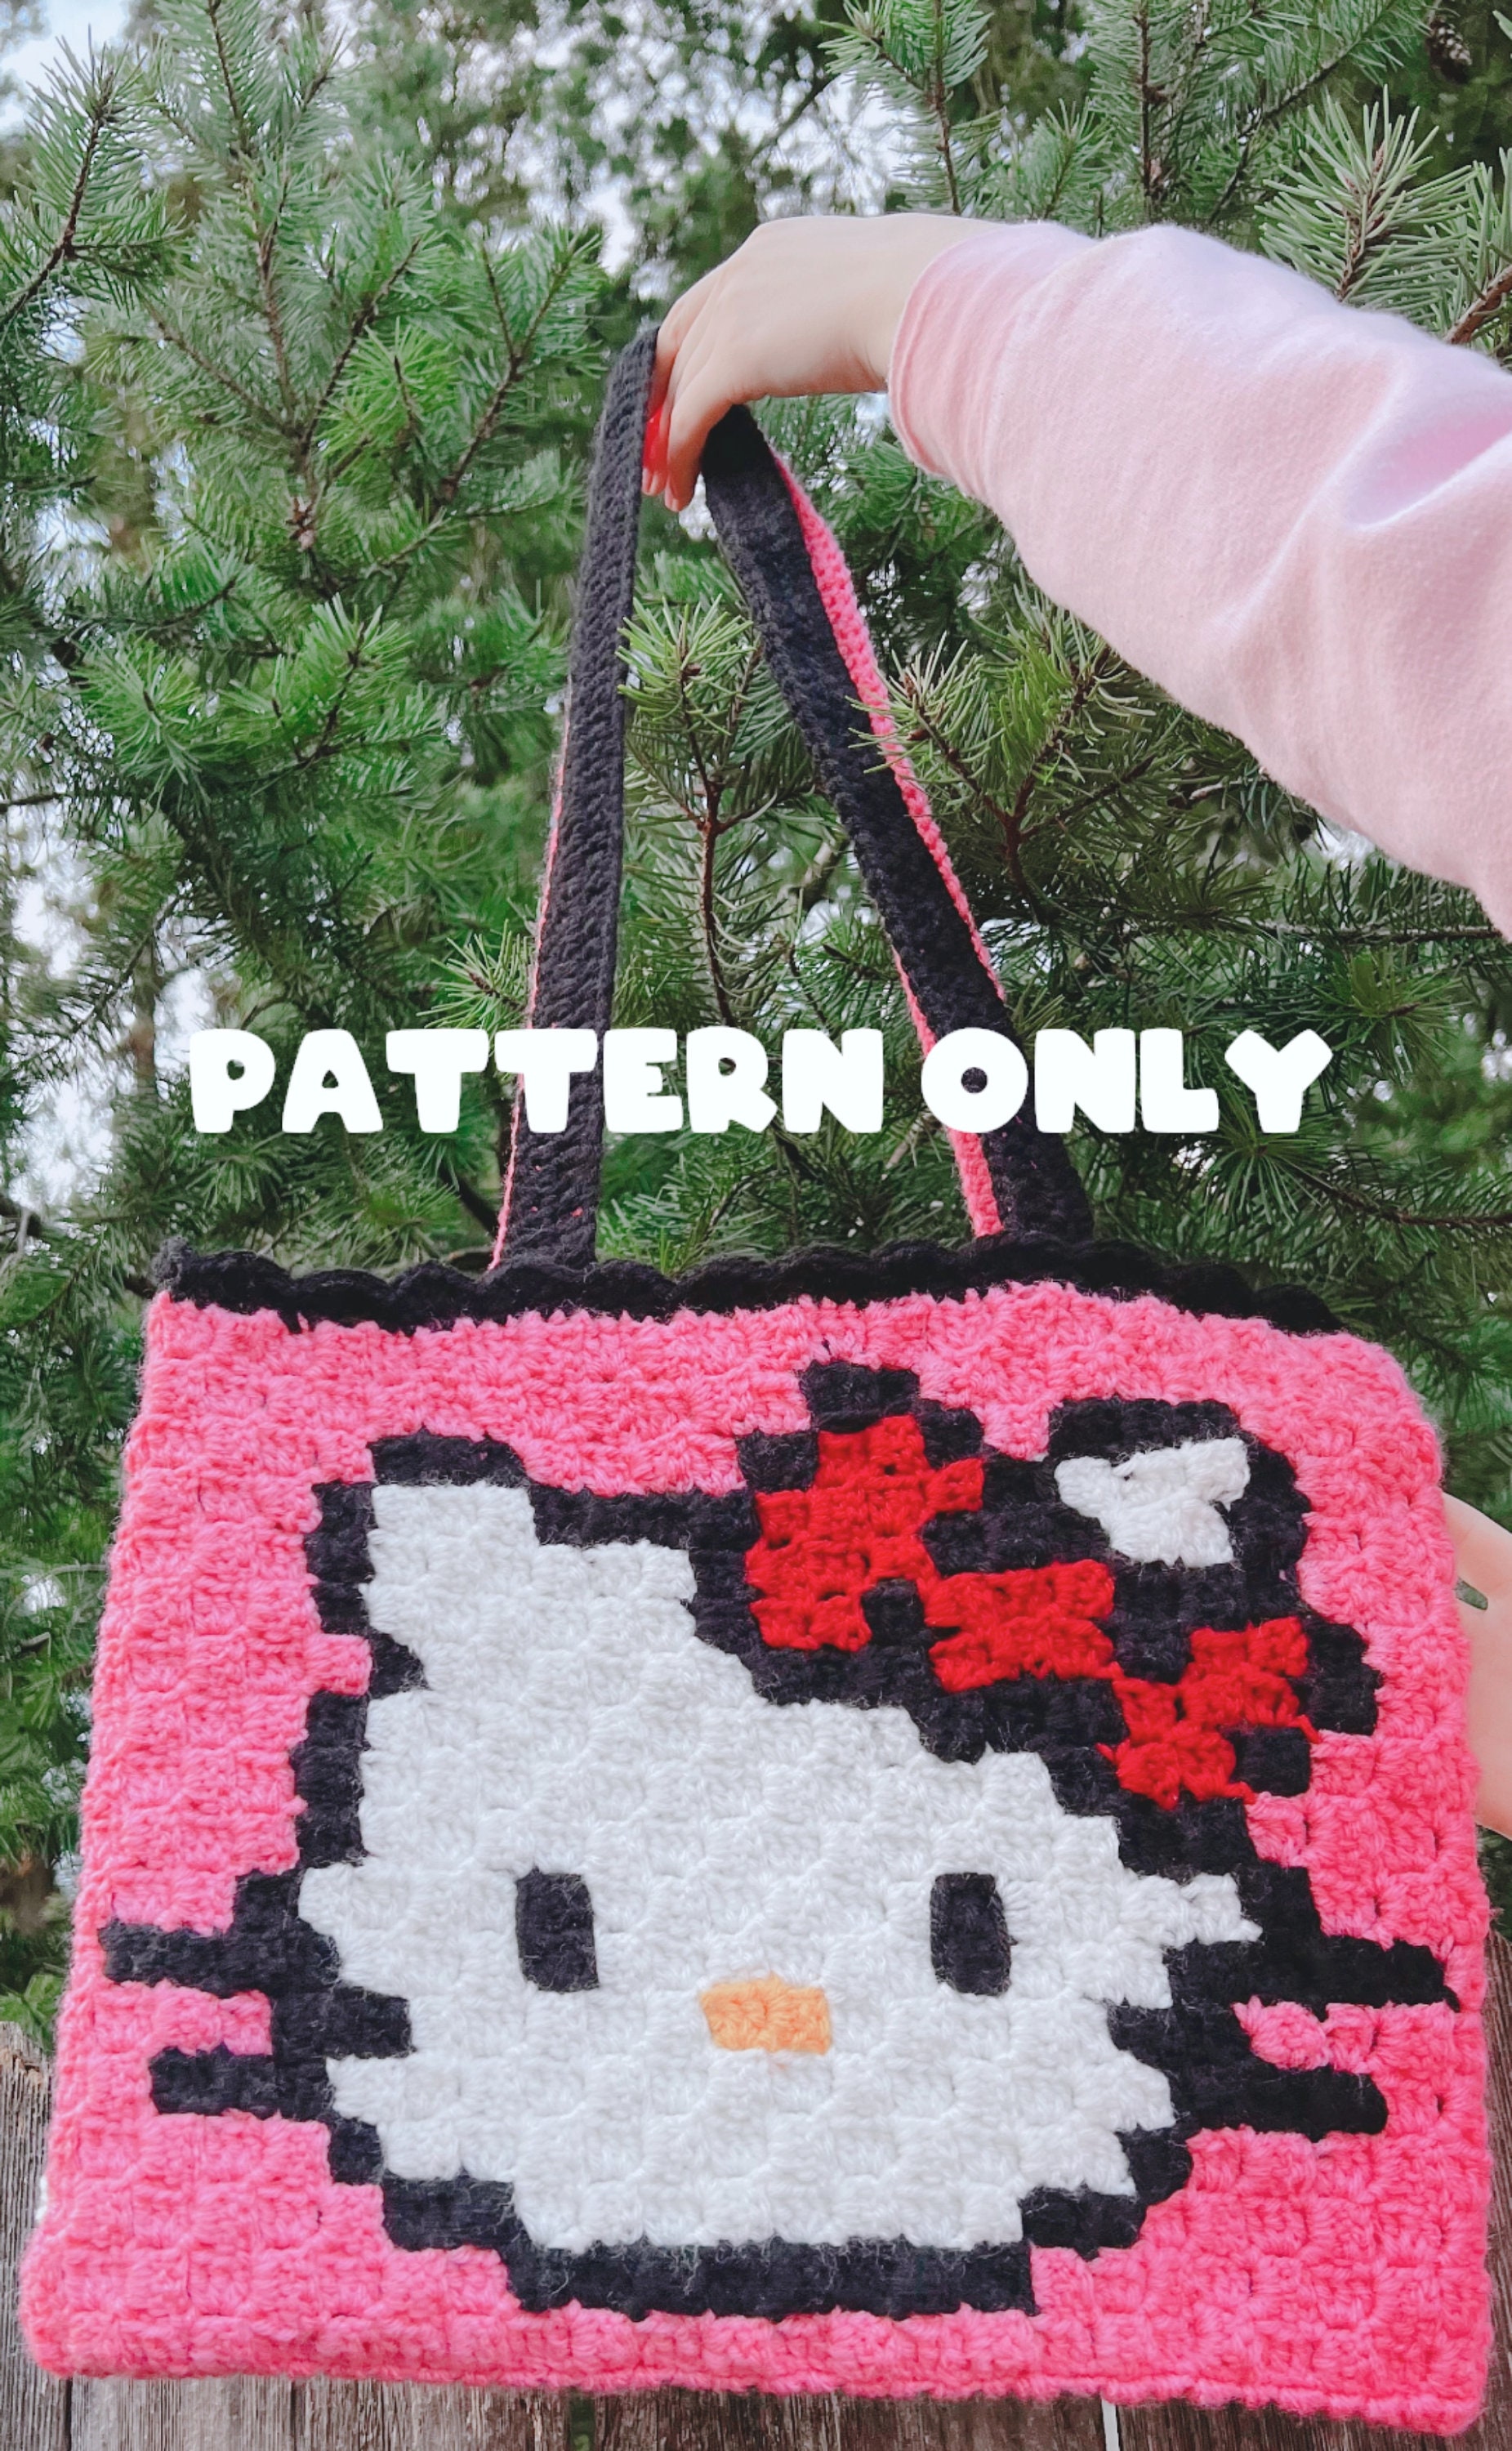 Hello Kitty Inspired Crossbody and Tote Bag